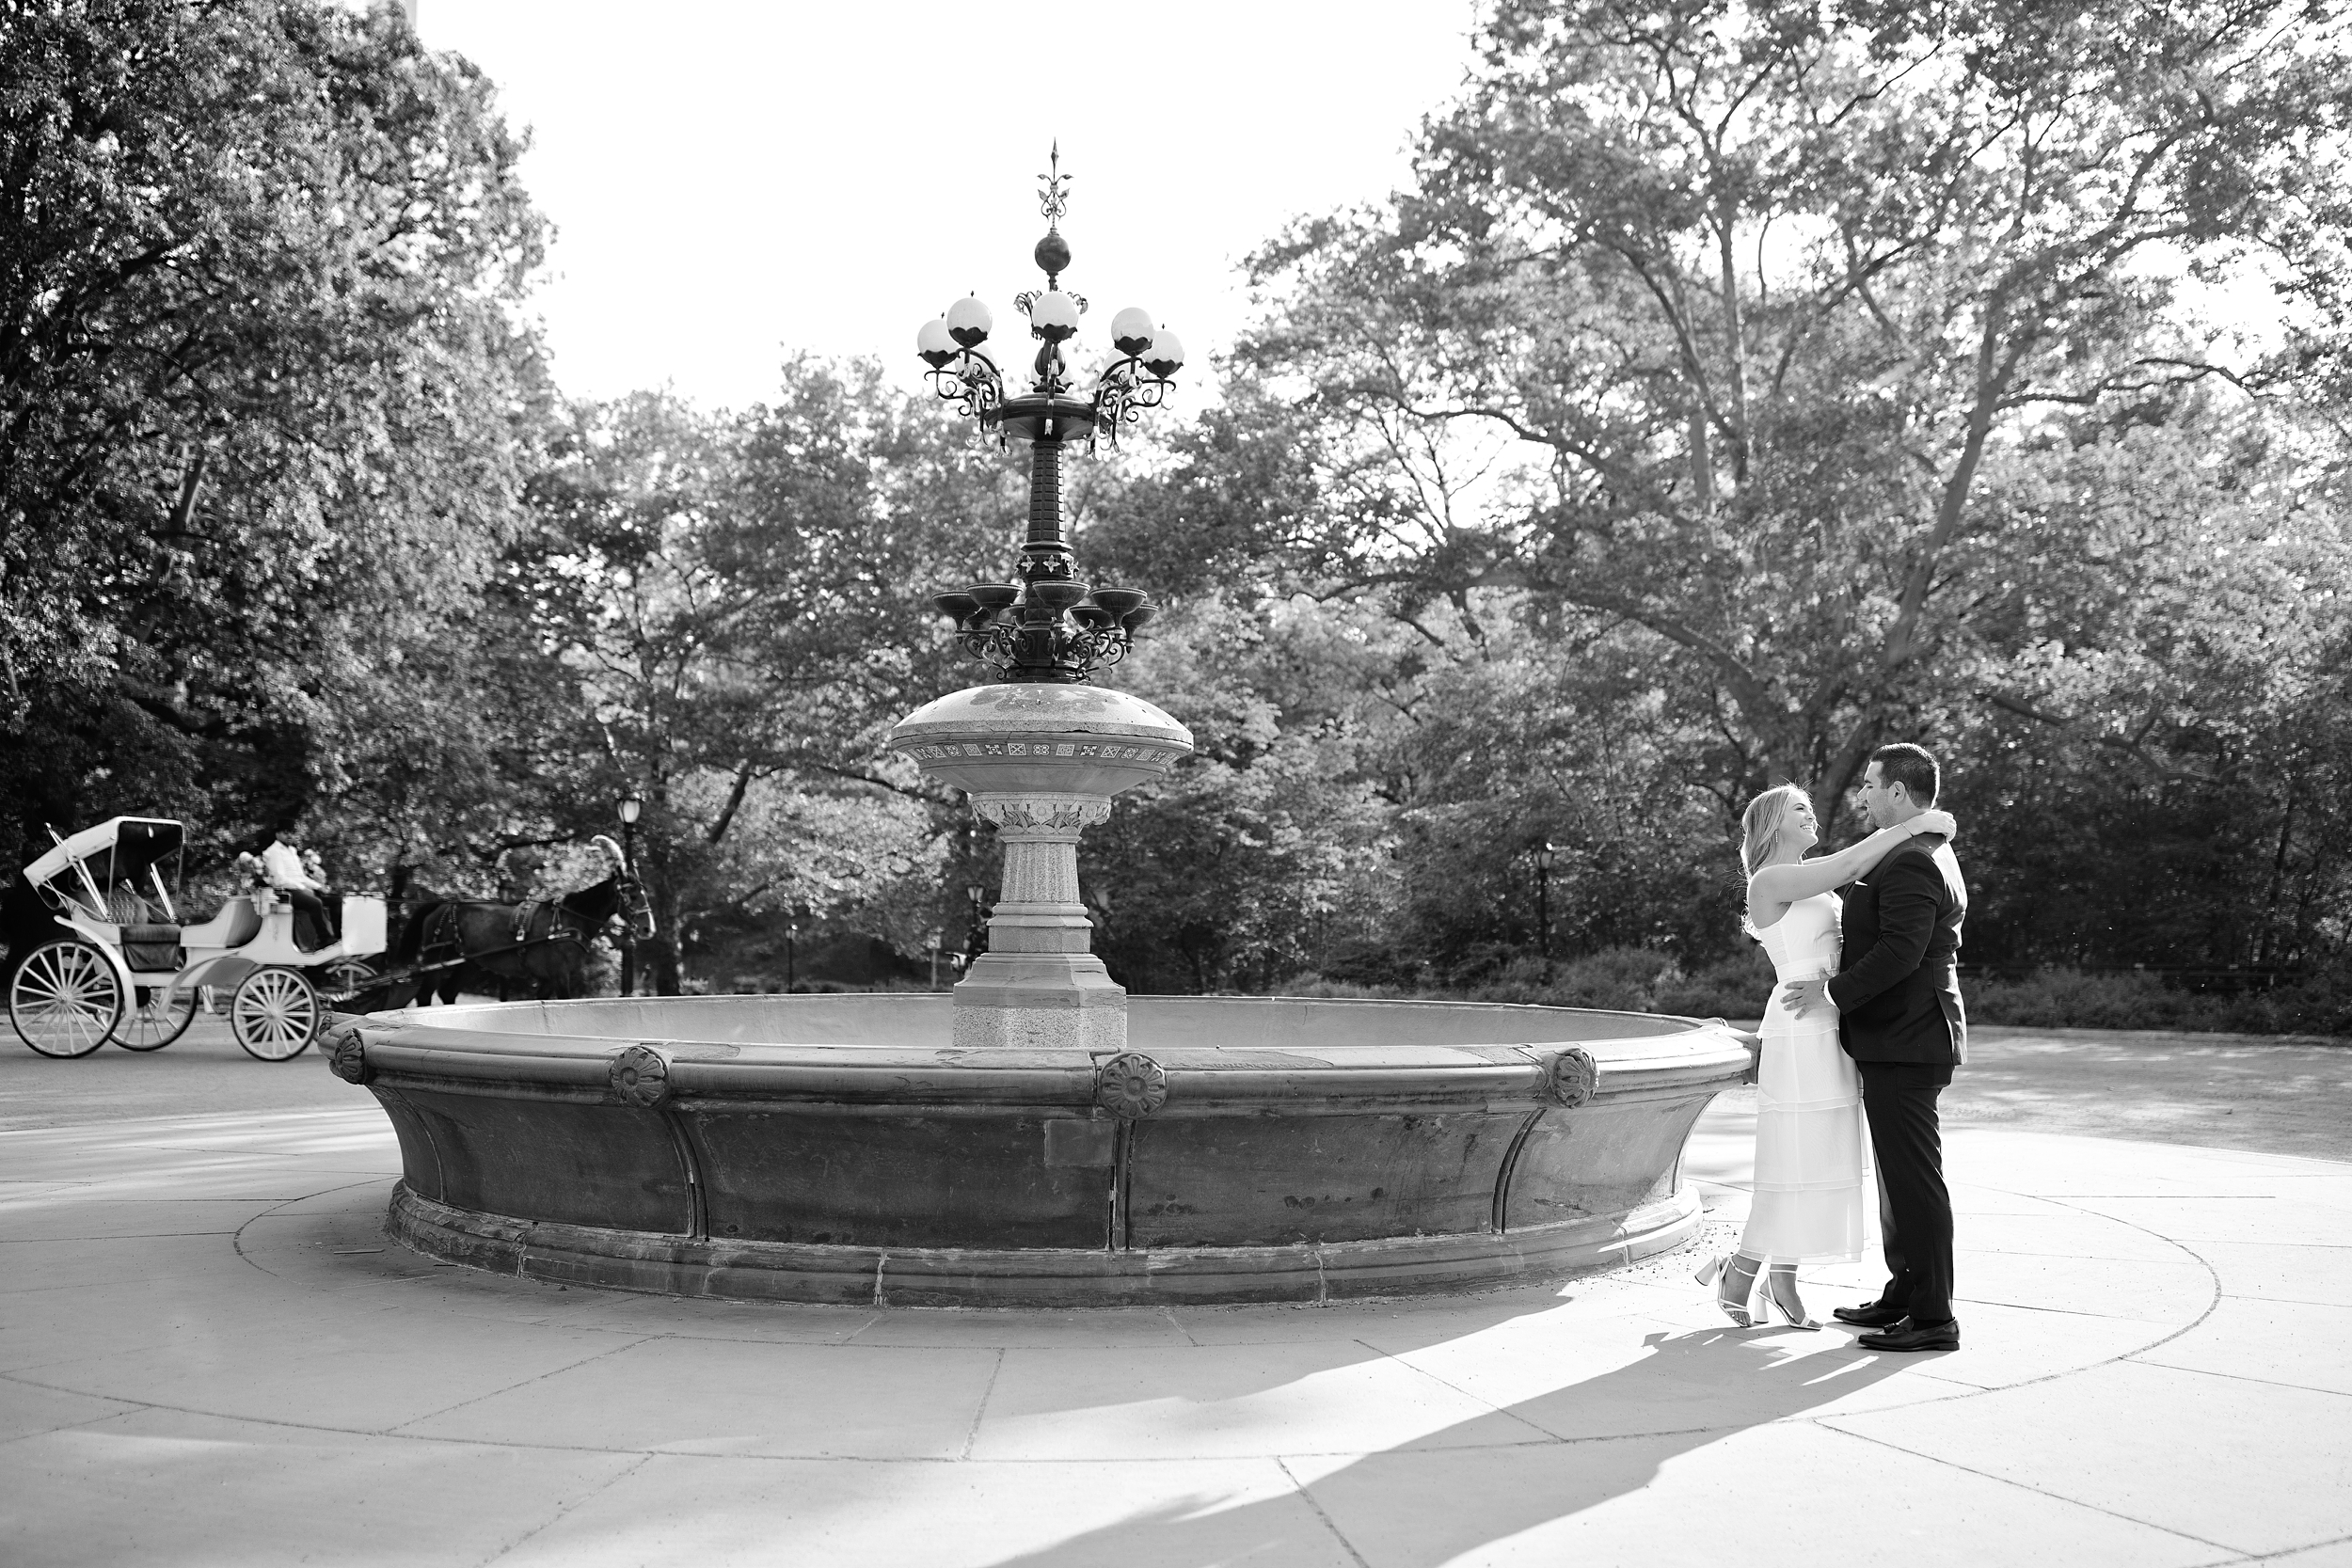 Chic Springtime Engagement Photos in Central Park New York City, captured by NYC Wedding and Engagement Photographers